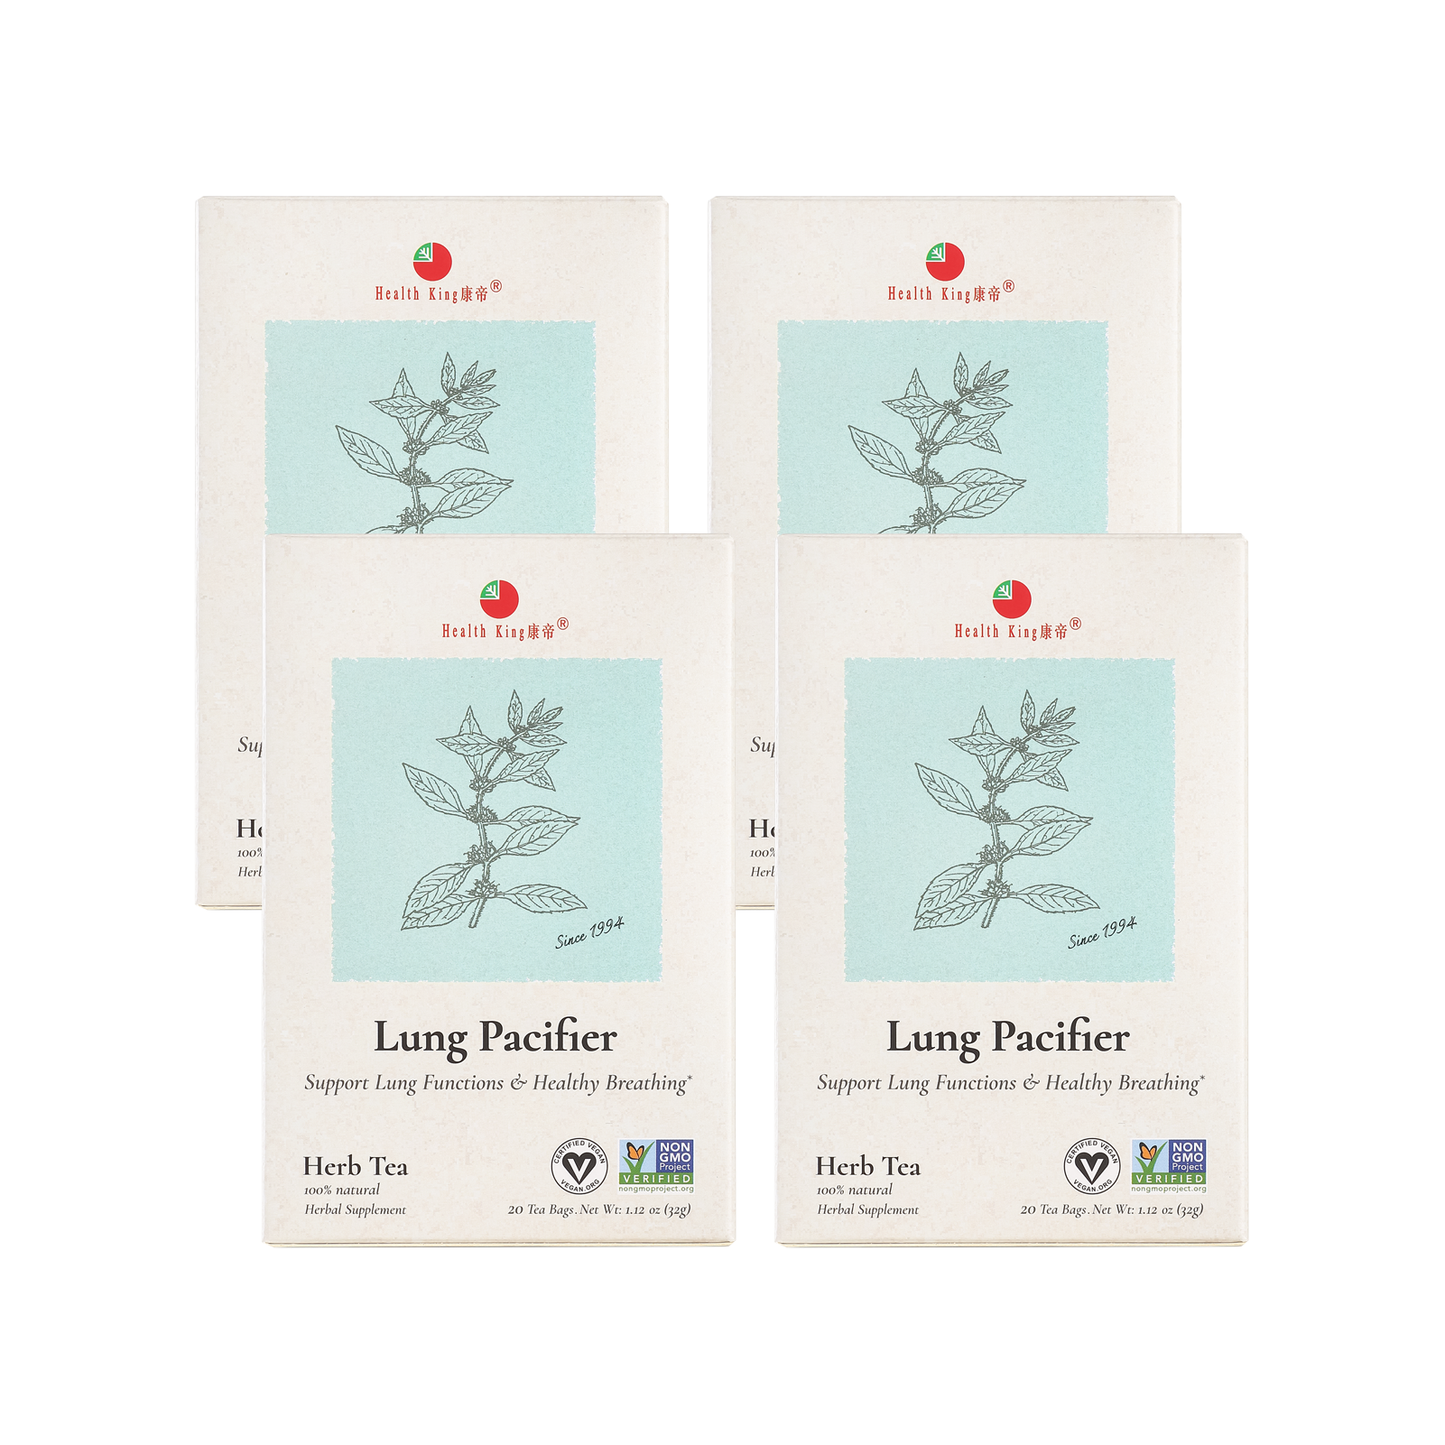 Four of Lung Pacifier Herb Tea packages against a white backdrop